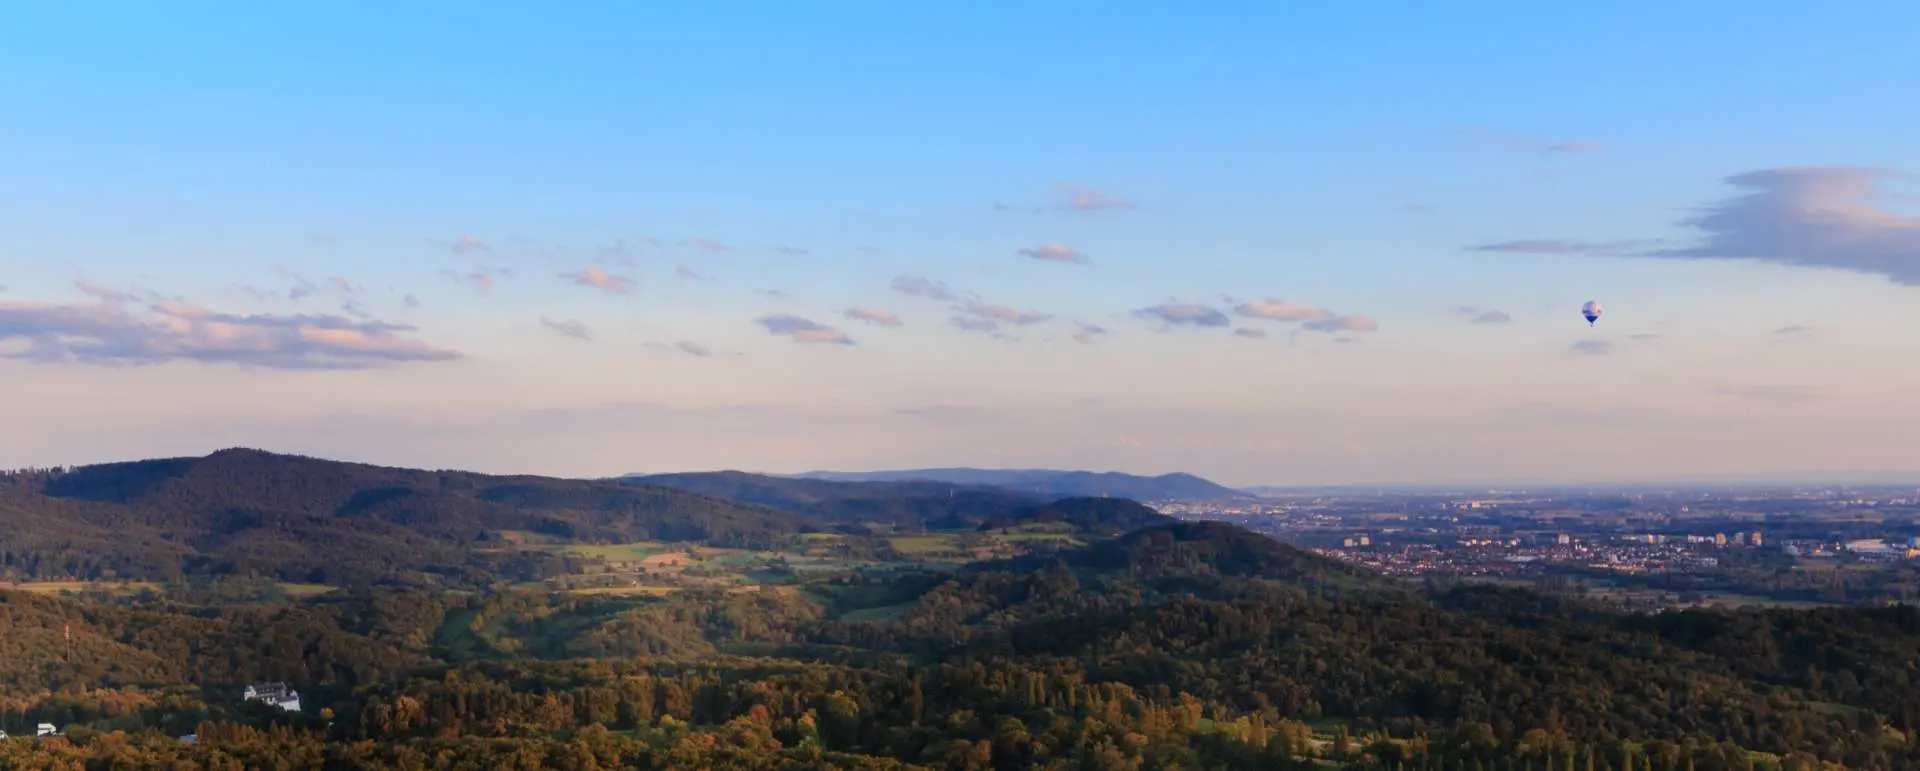 Constituency of Odenwald - the destination for group hotel for cultural trips